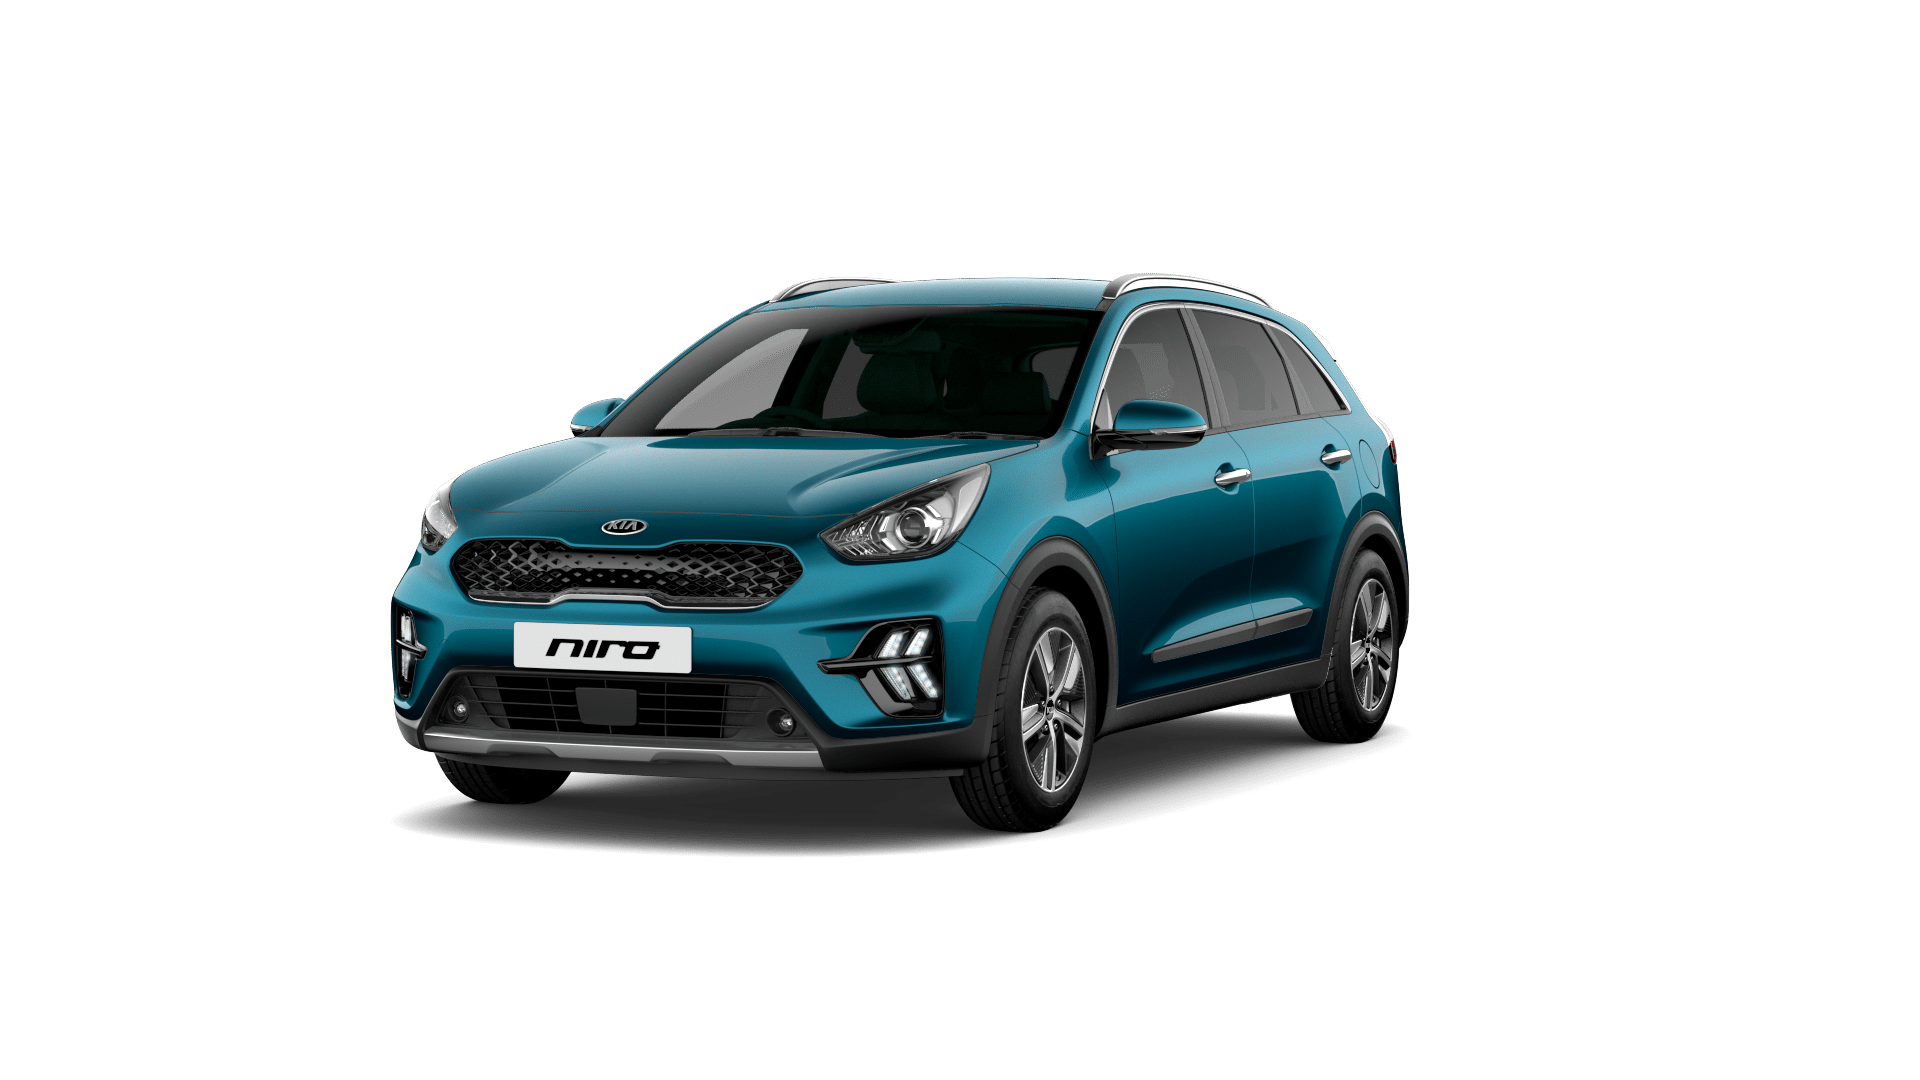 straf gevangenis zonde The 2020 Kia Niro is back with a cool, new design | Splend